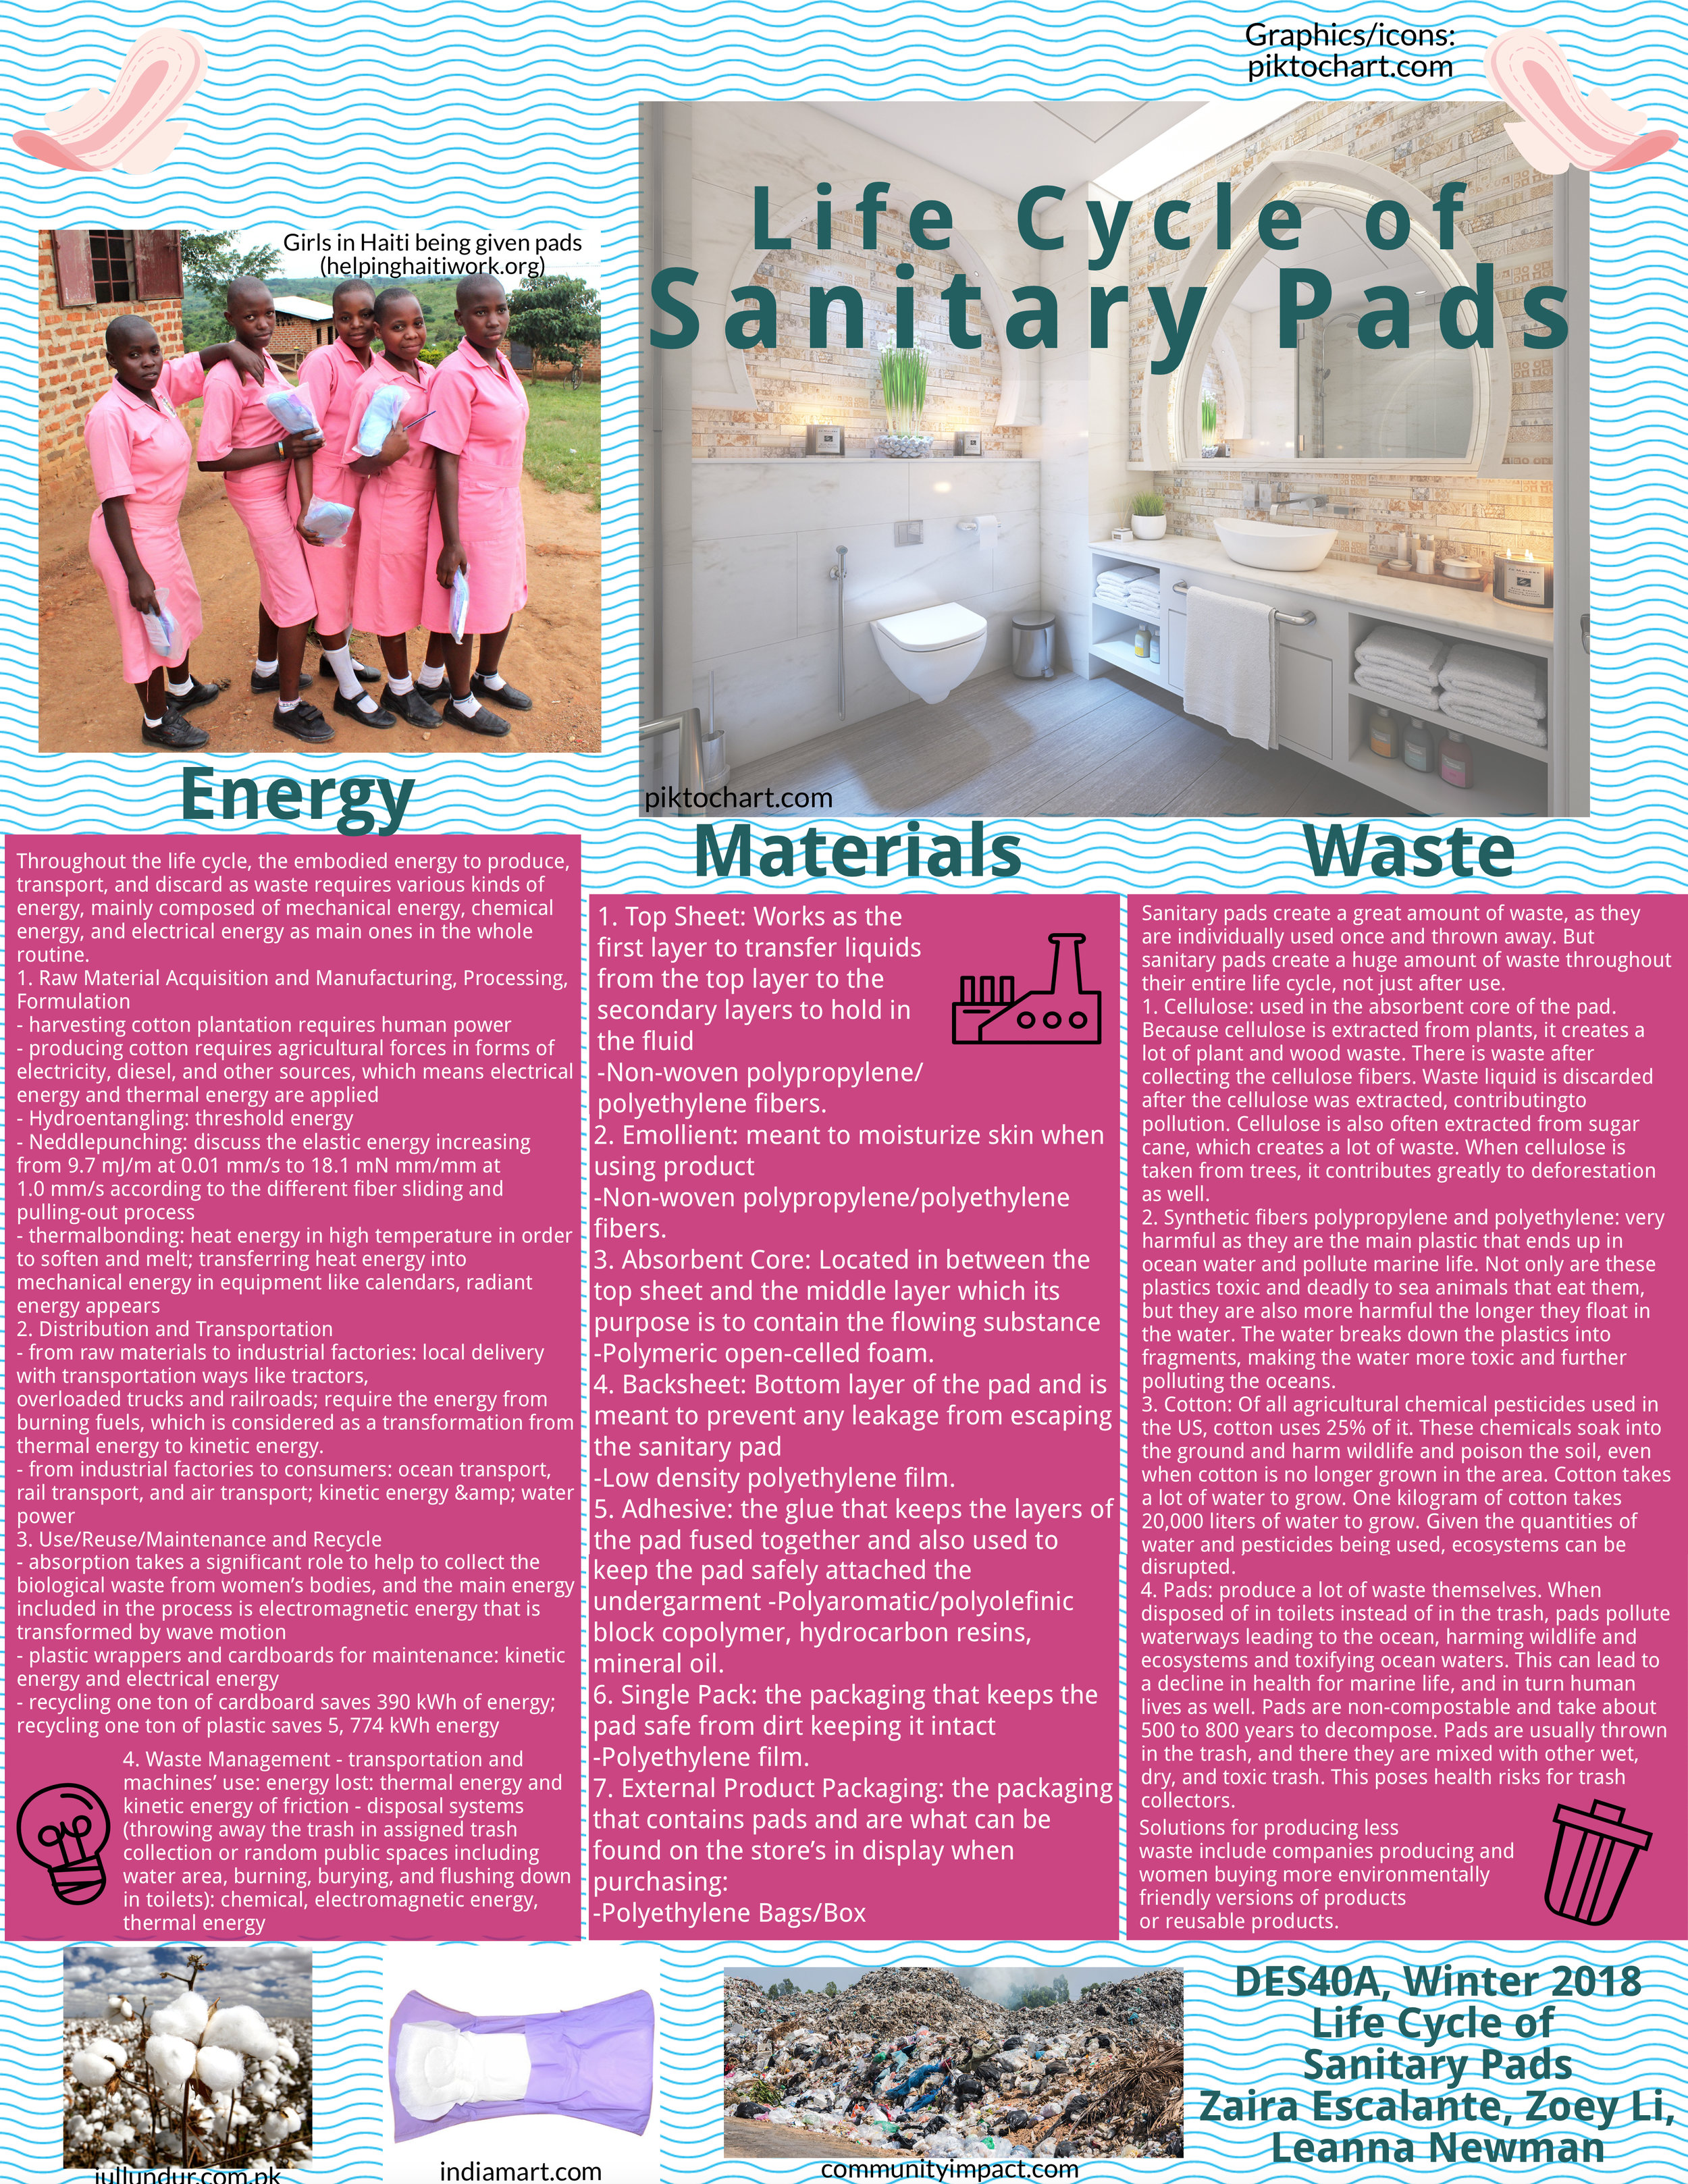 Luxury Reusable Sanitary Pads - super absorbent, eco friendly